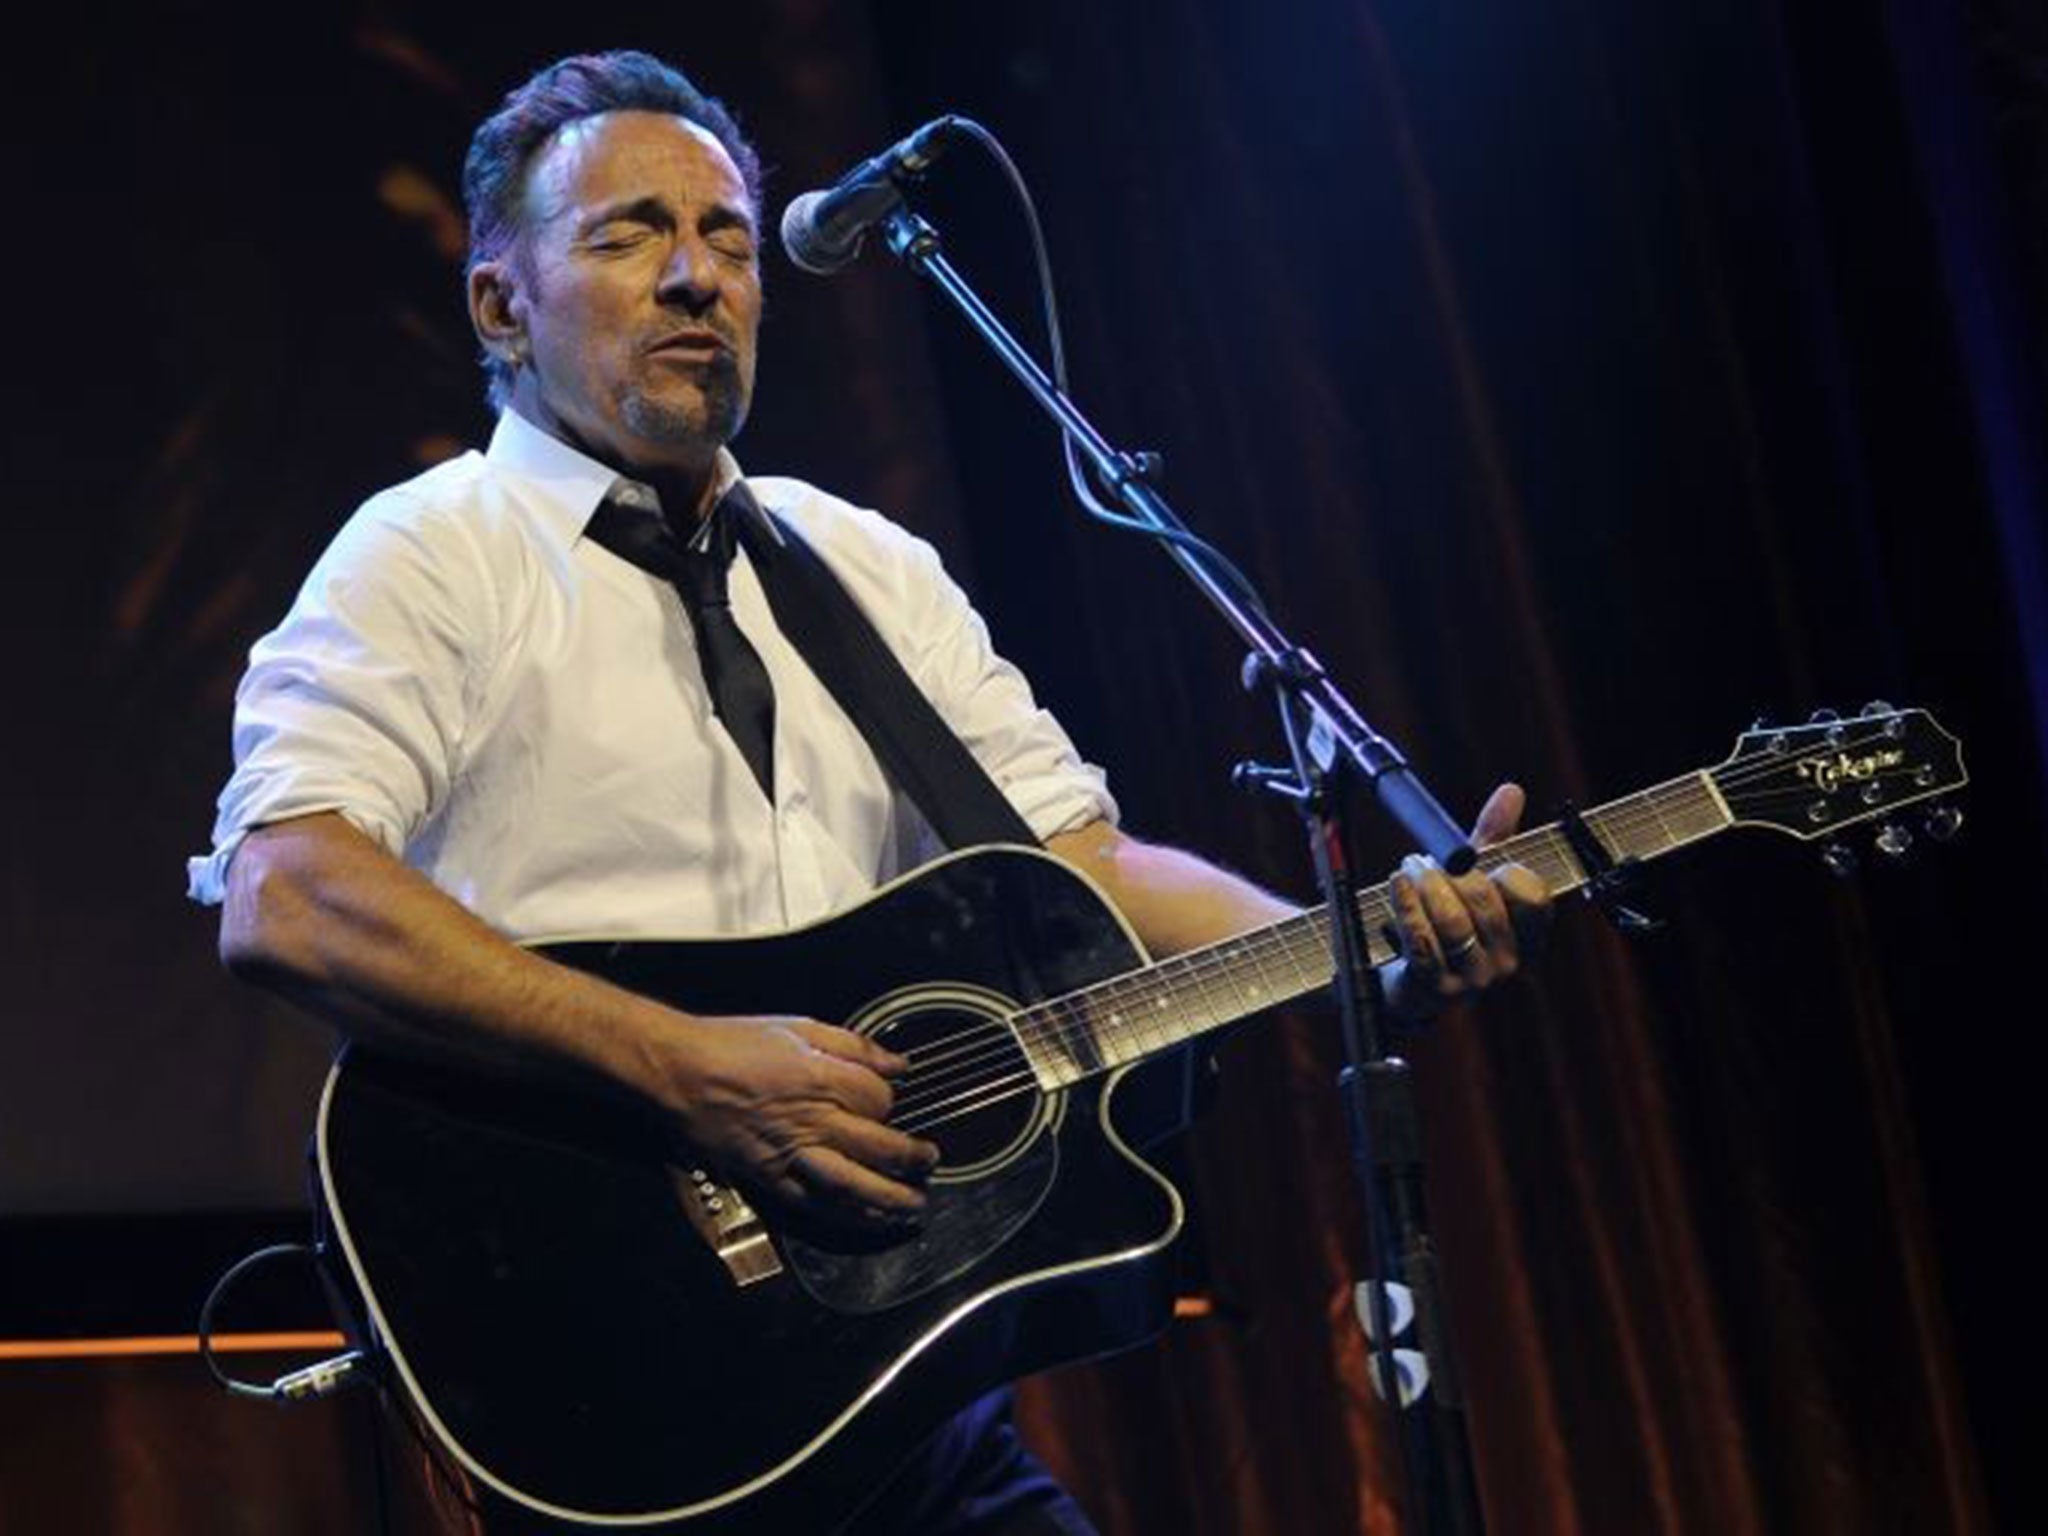 Bruce Springsteen always enjoys huge demand for his widely acclaimed live shows